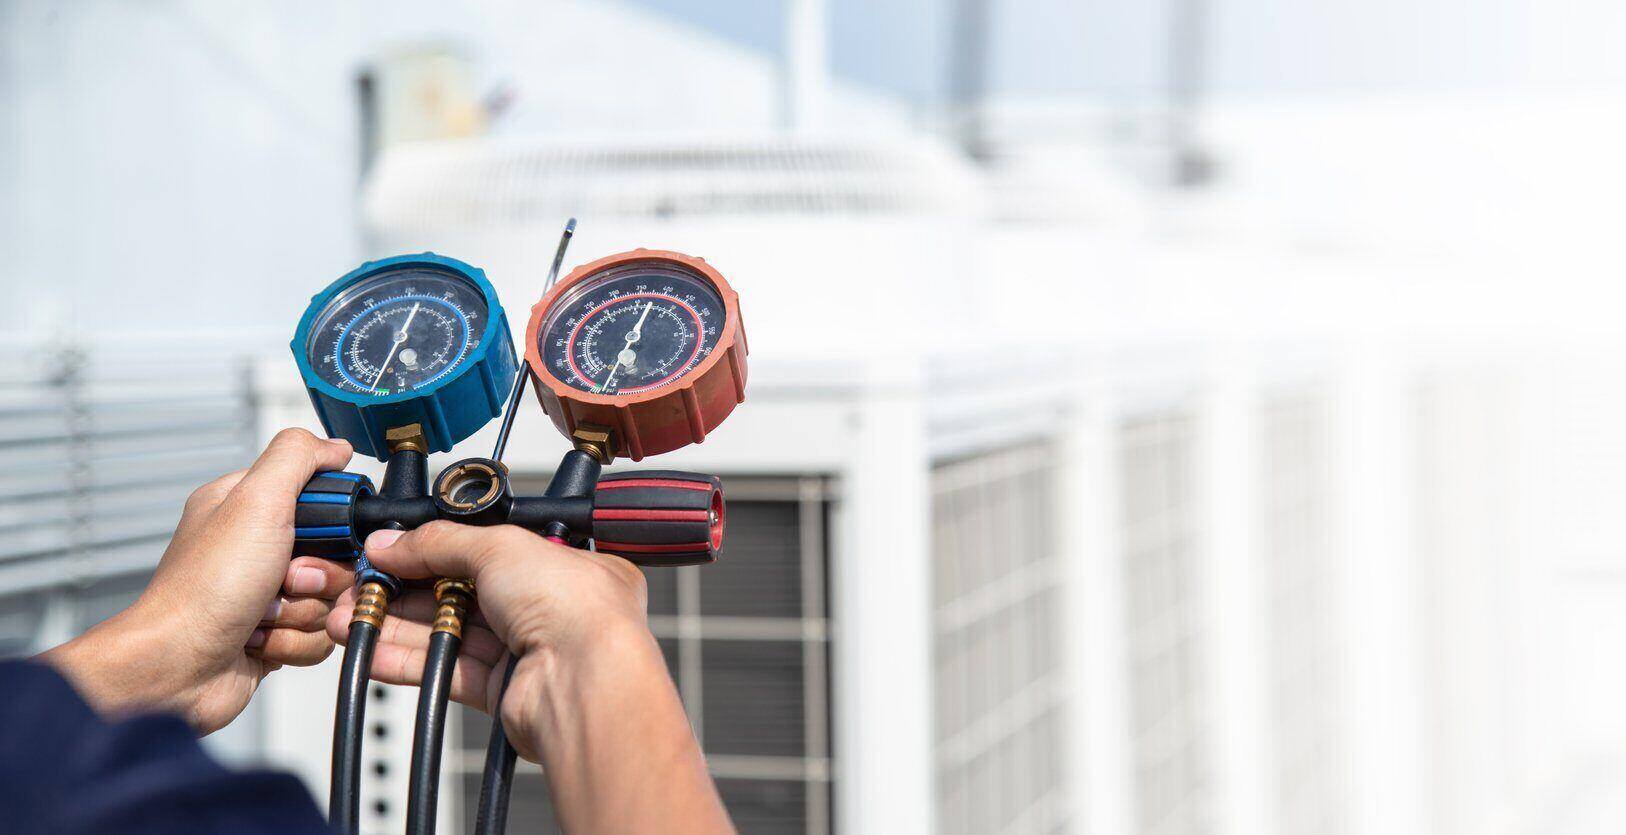 Repairman hands holding an air conditioner measuring gauge